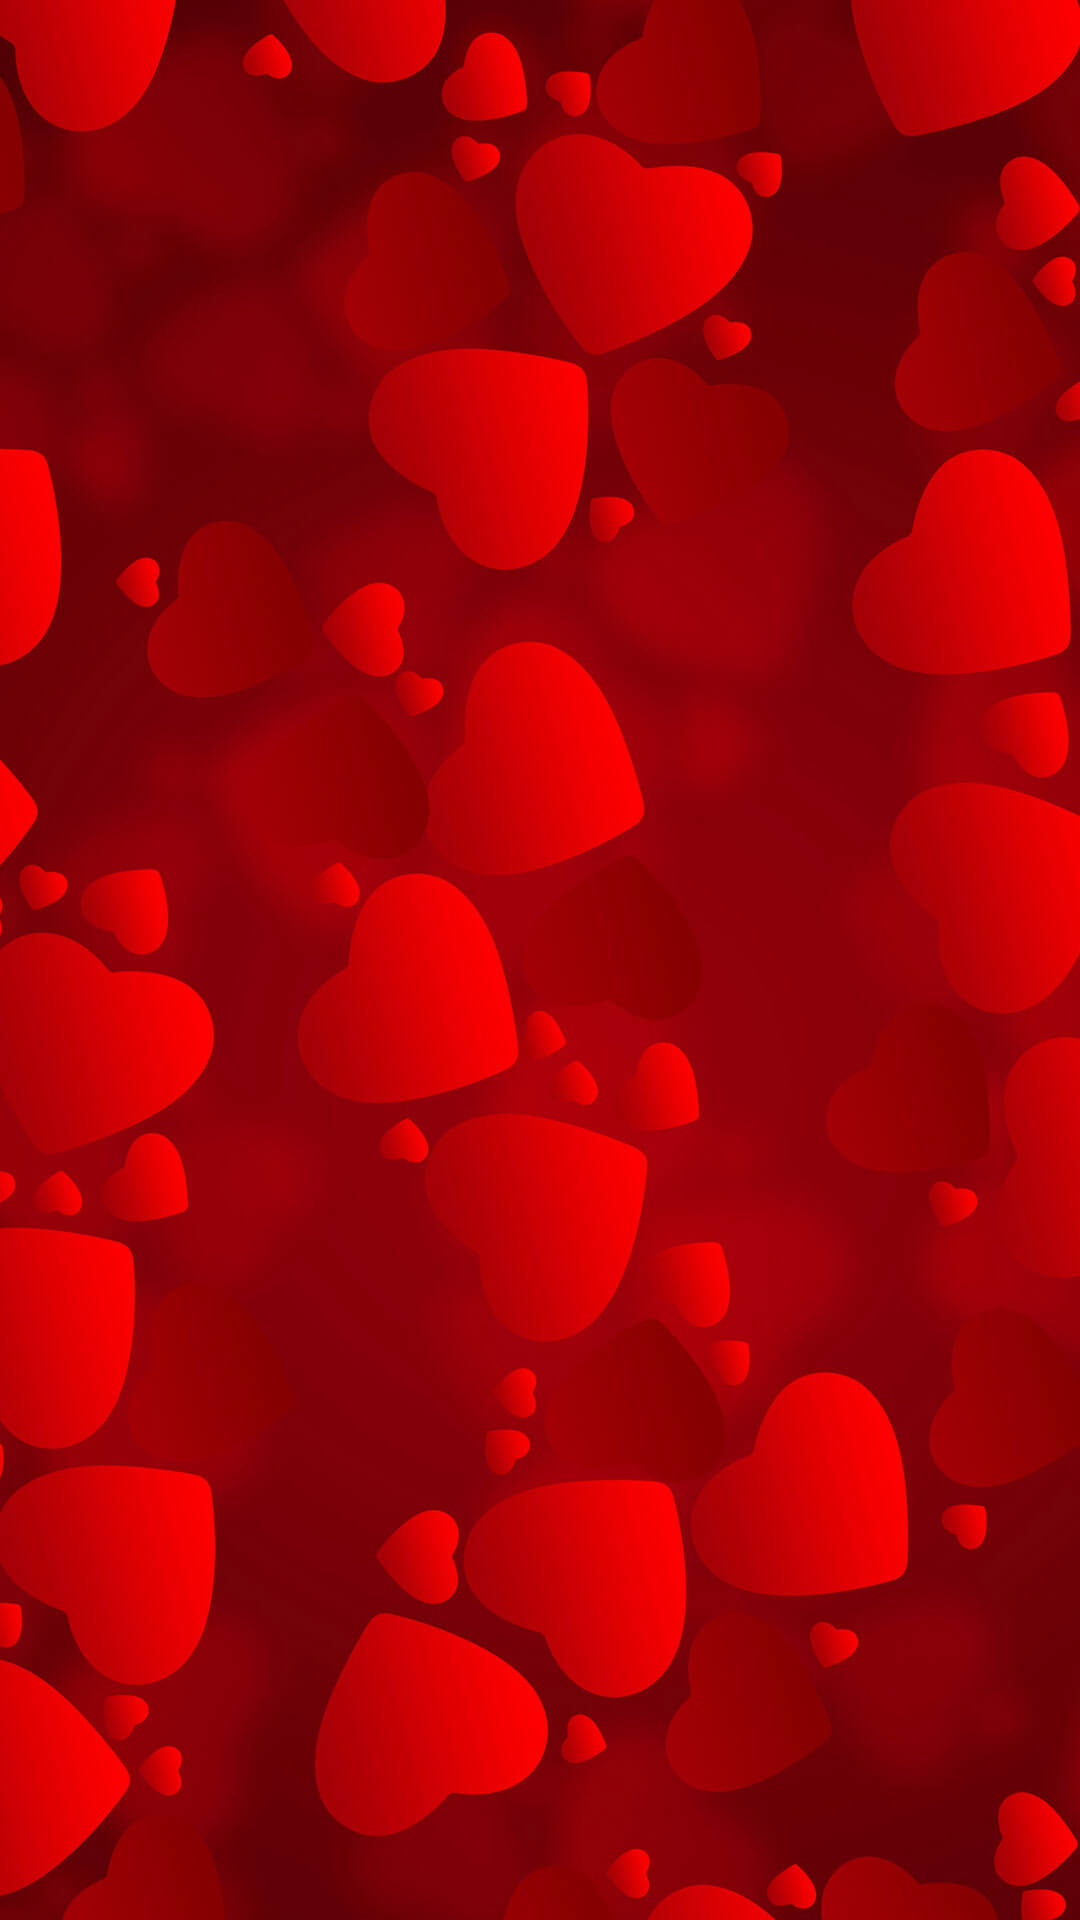 iphone wallpapers full hd,red,heart,petal,pattern,valentine's day